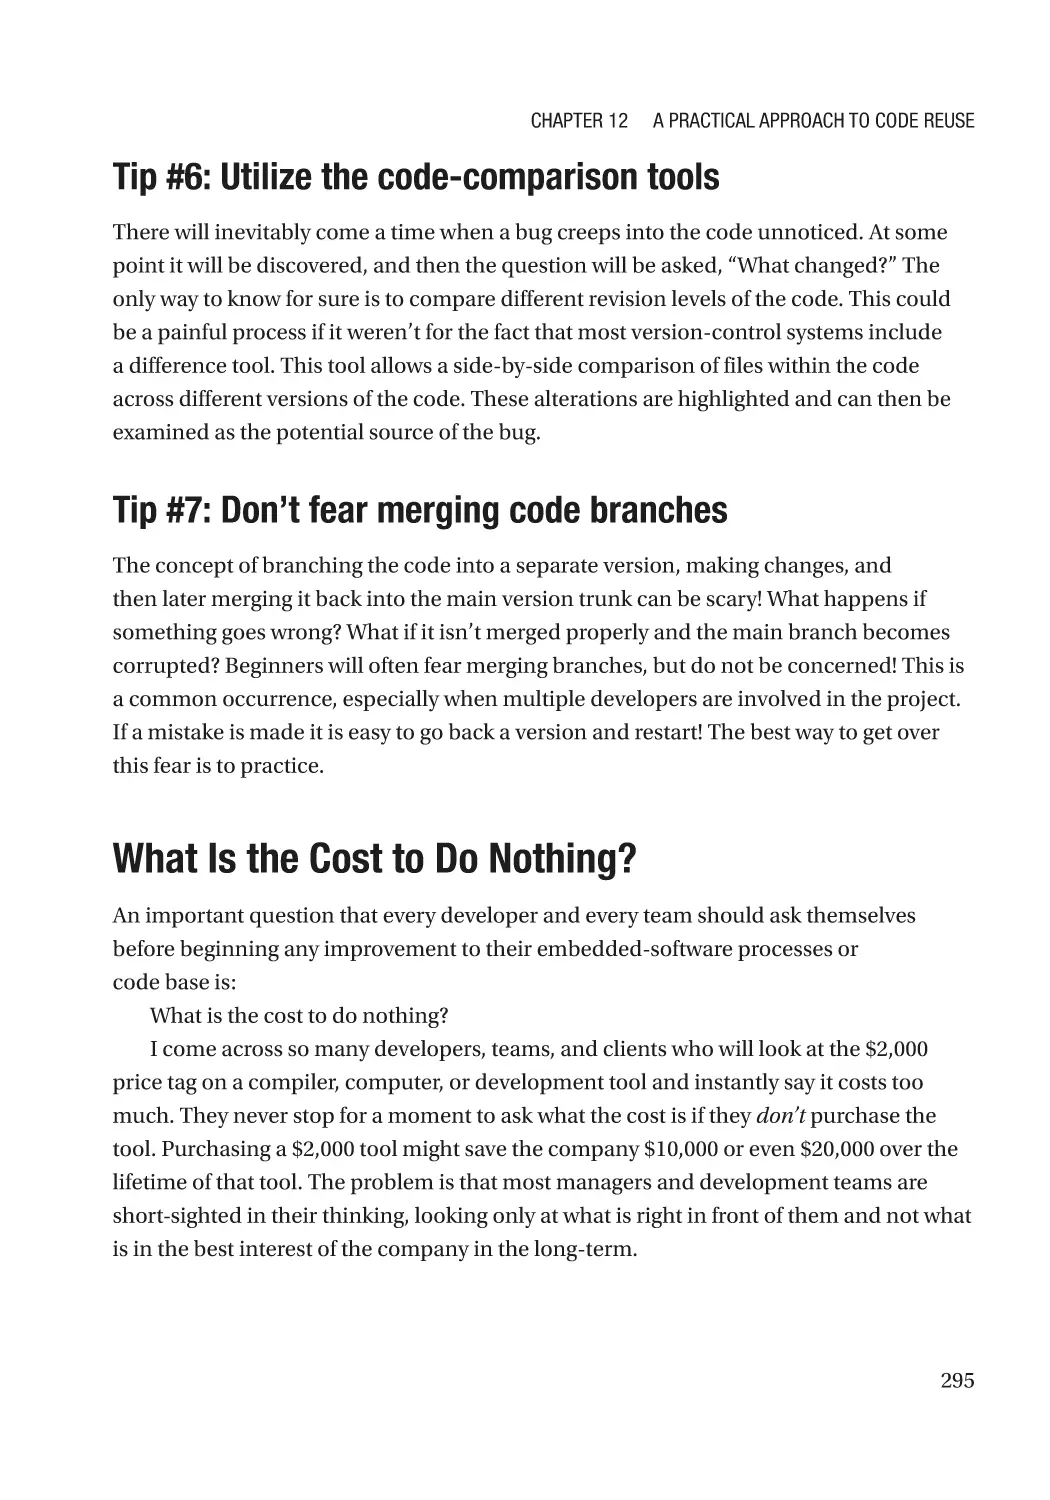 Tip #6
Tip #7
What Is the Cost to Do Nothing?